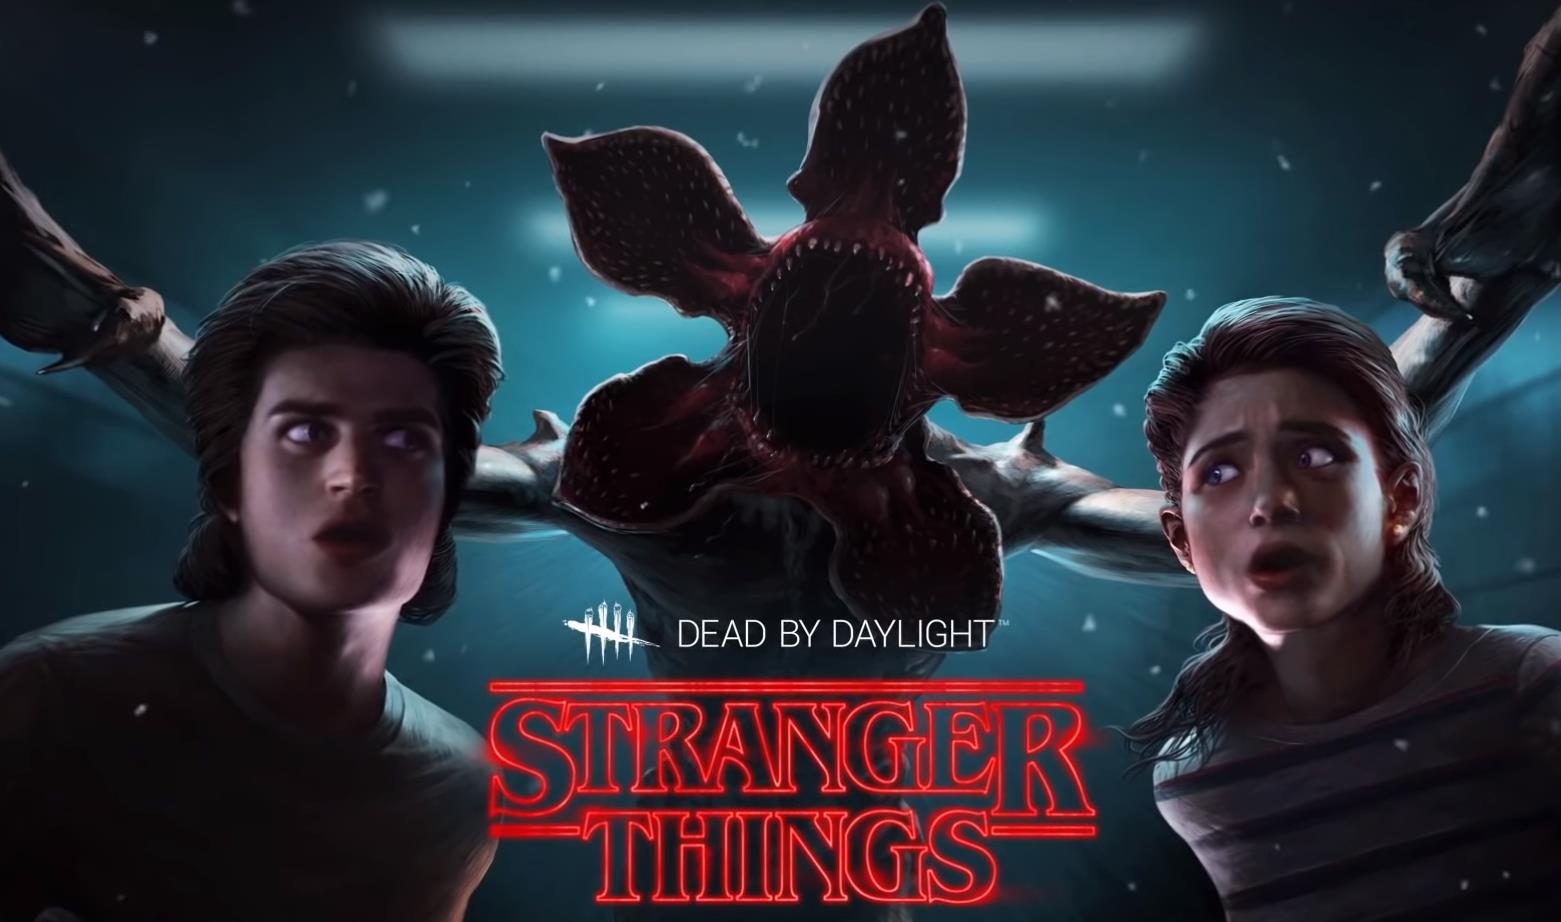 Image for Stranger Things' Demogorgon is coming to Dead by Daylight along with Nancy and Steve